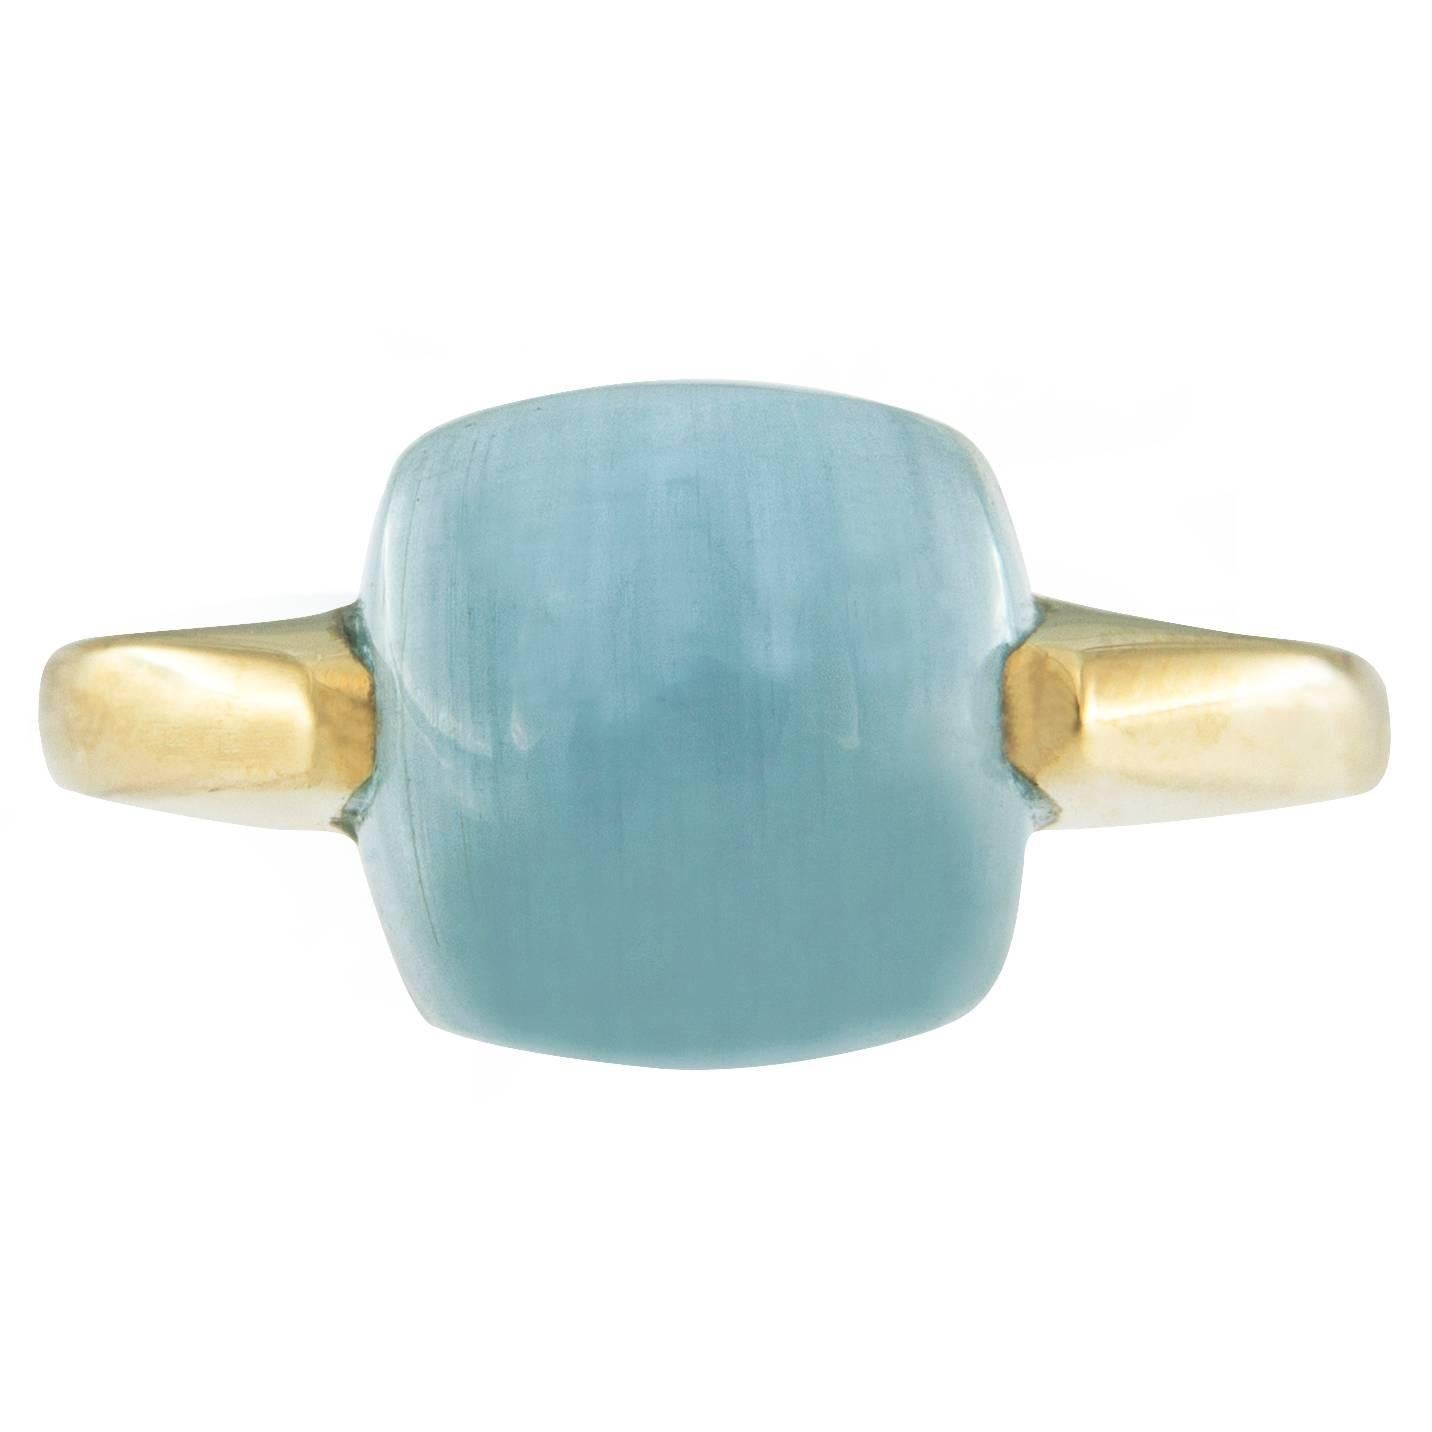 Jona design collection, hand crafted in Italy, 18 karat yellow gold ring set with a 6.45 carat cabochon Aquamarine. US size 6, EU size 12, can be sized to any specification.
Dimensions: H 1 in / 0.81 in W / 0.40 in D - H 20.68 mm / 20.63 in W /